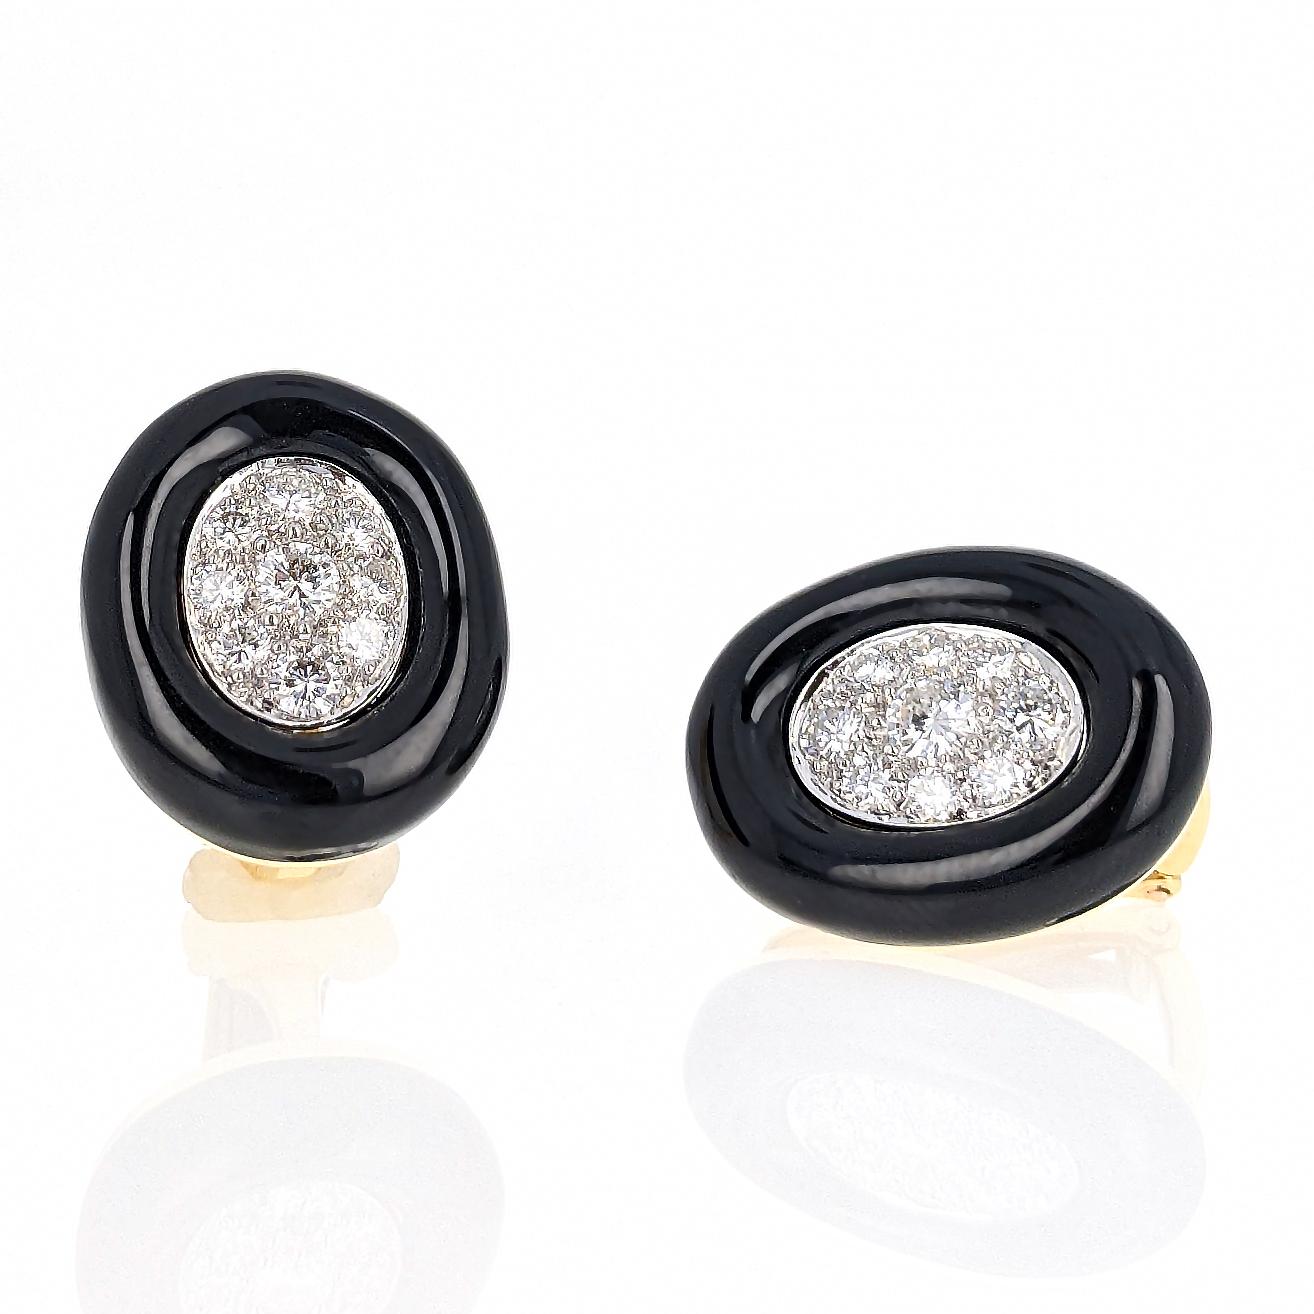 These oval-shaped clip earrings by David Webb feature 18 round brilliant-cut diamonds weighing approximately 1.3 carats total and are surrounded by black enamel. Mounted in 18 karat yellow gold and platinum. Signed Webb and marked 18K PLAT.

These